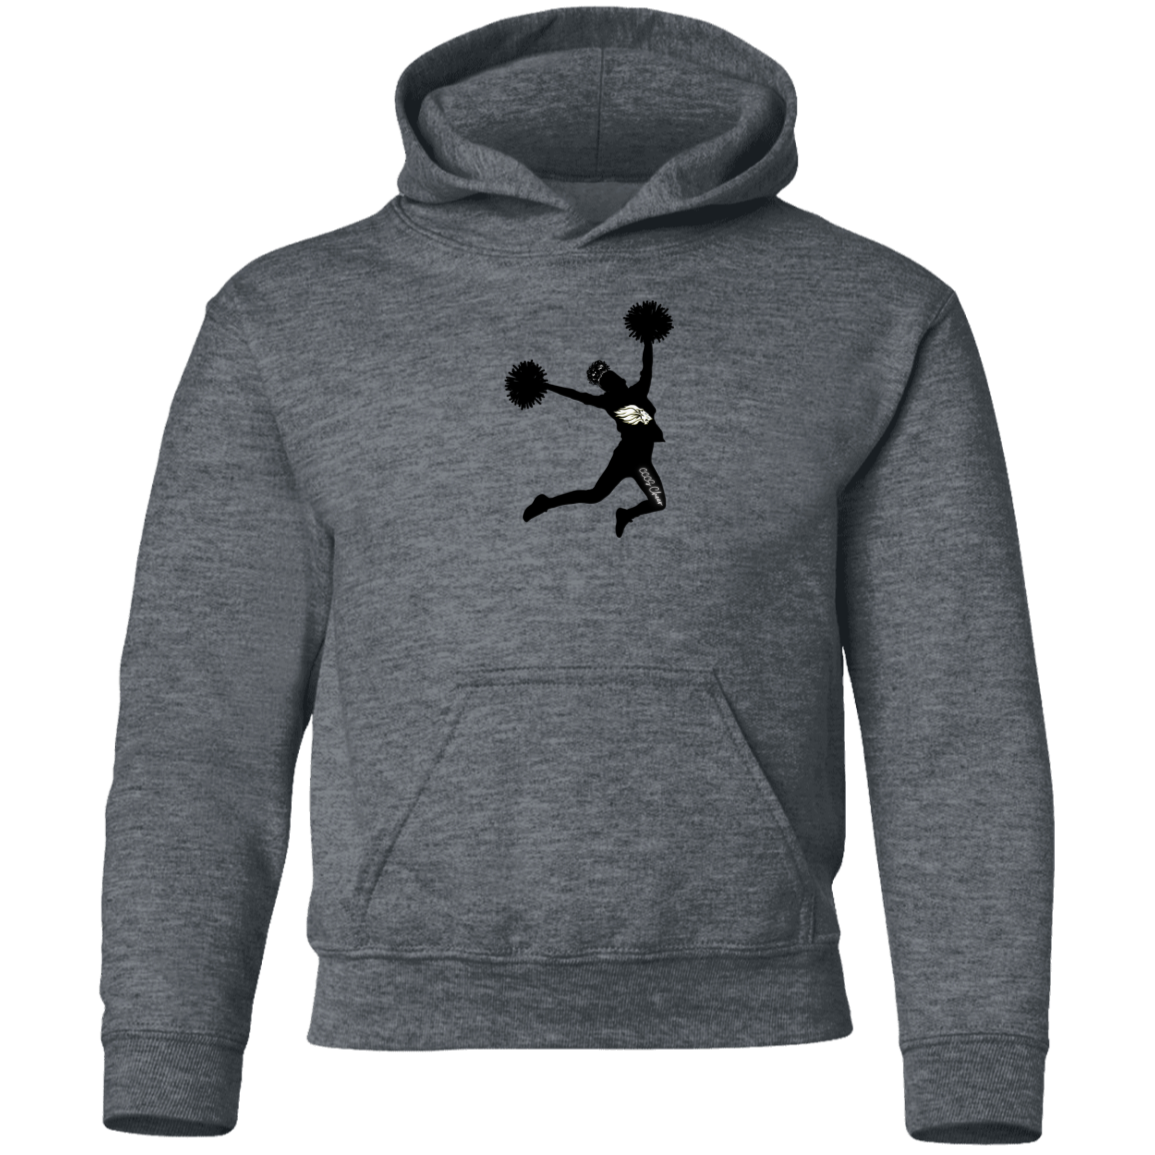 CCCS Cheer Silhouette Youth Pullover Hoodie